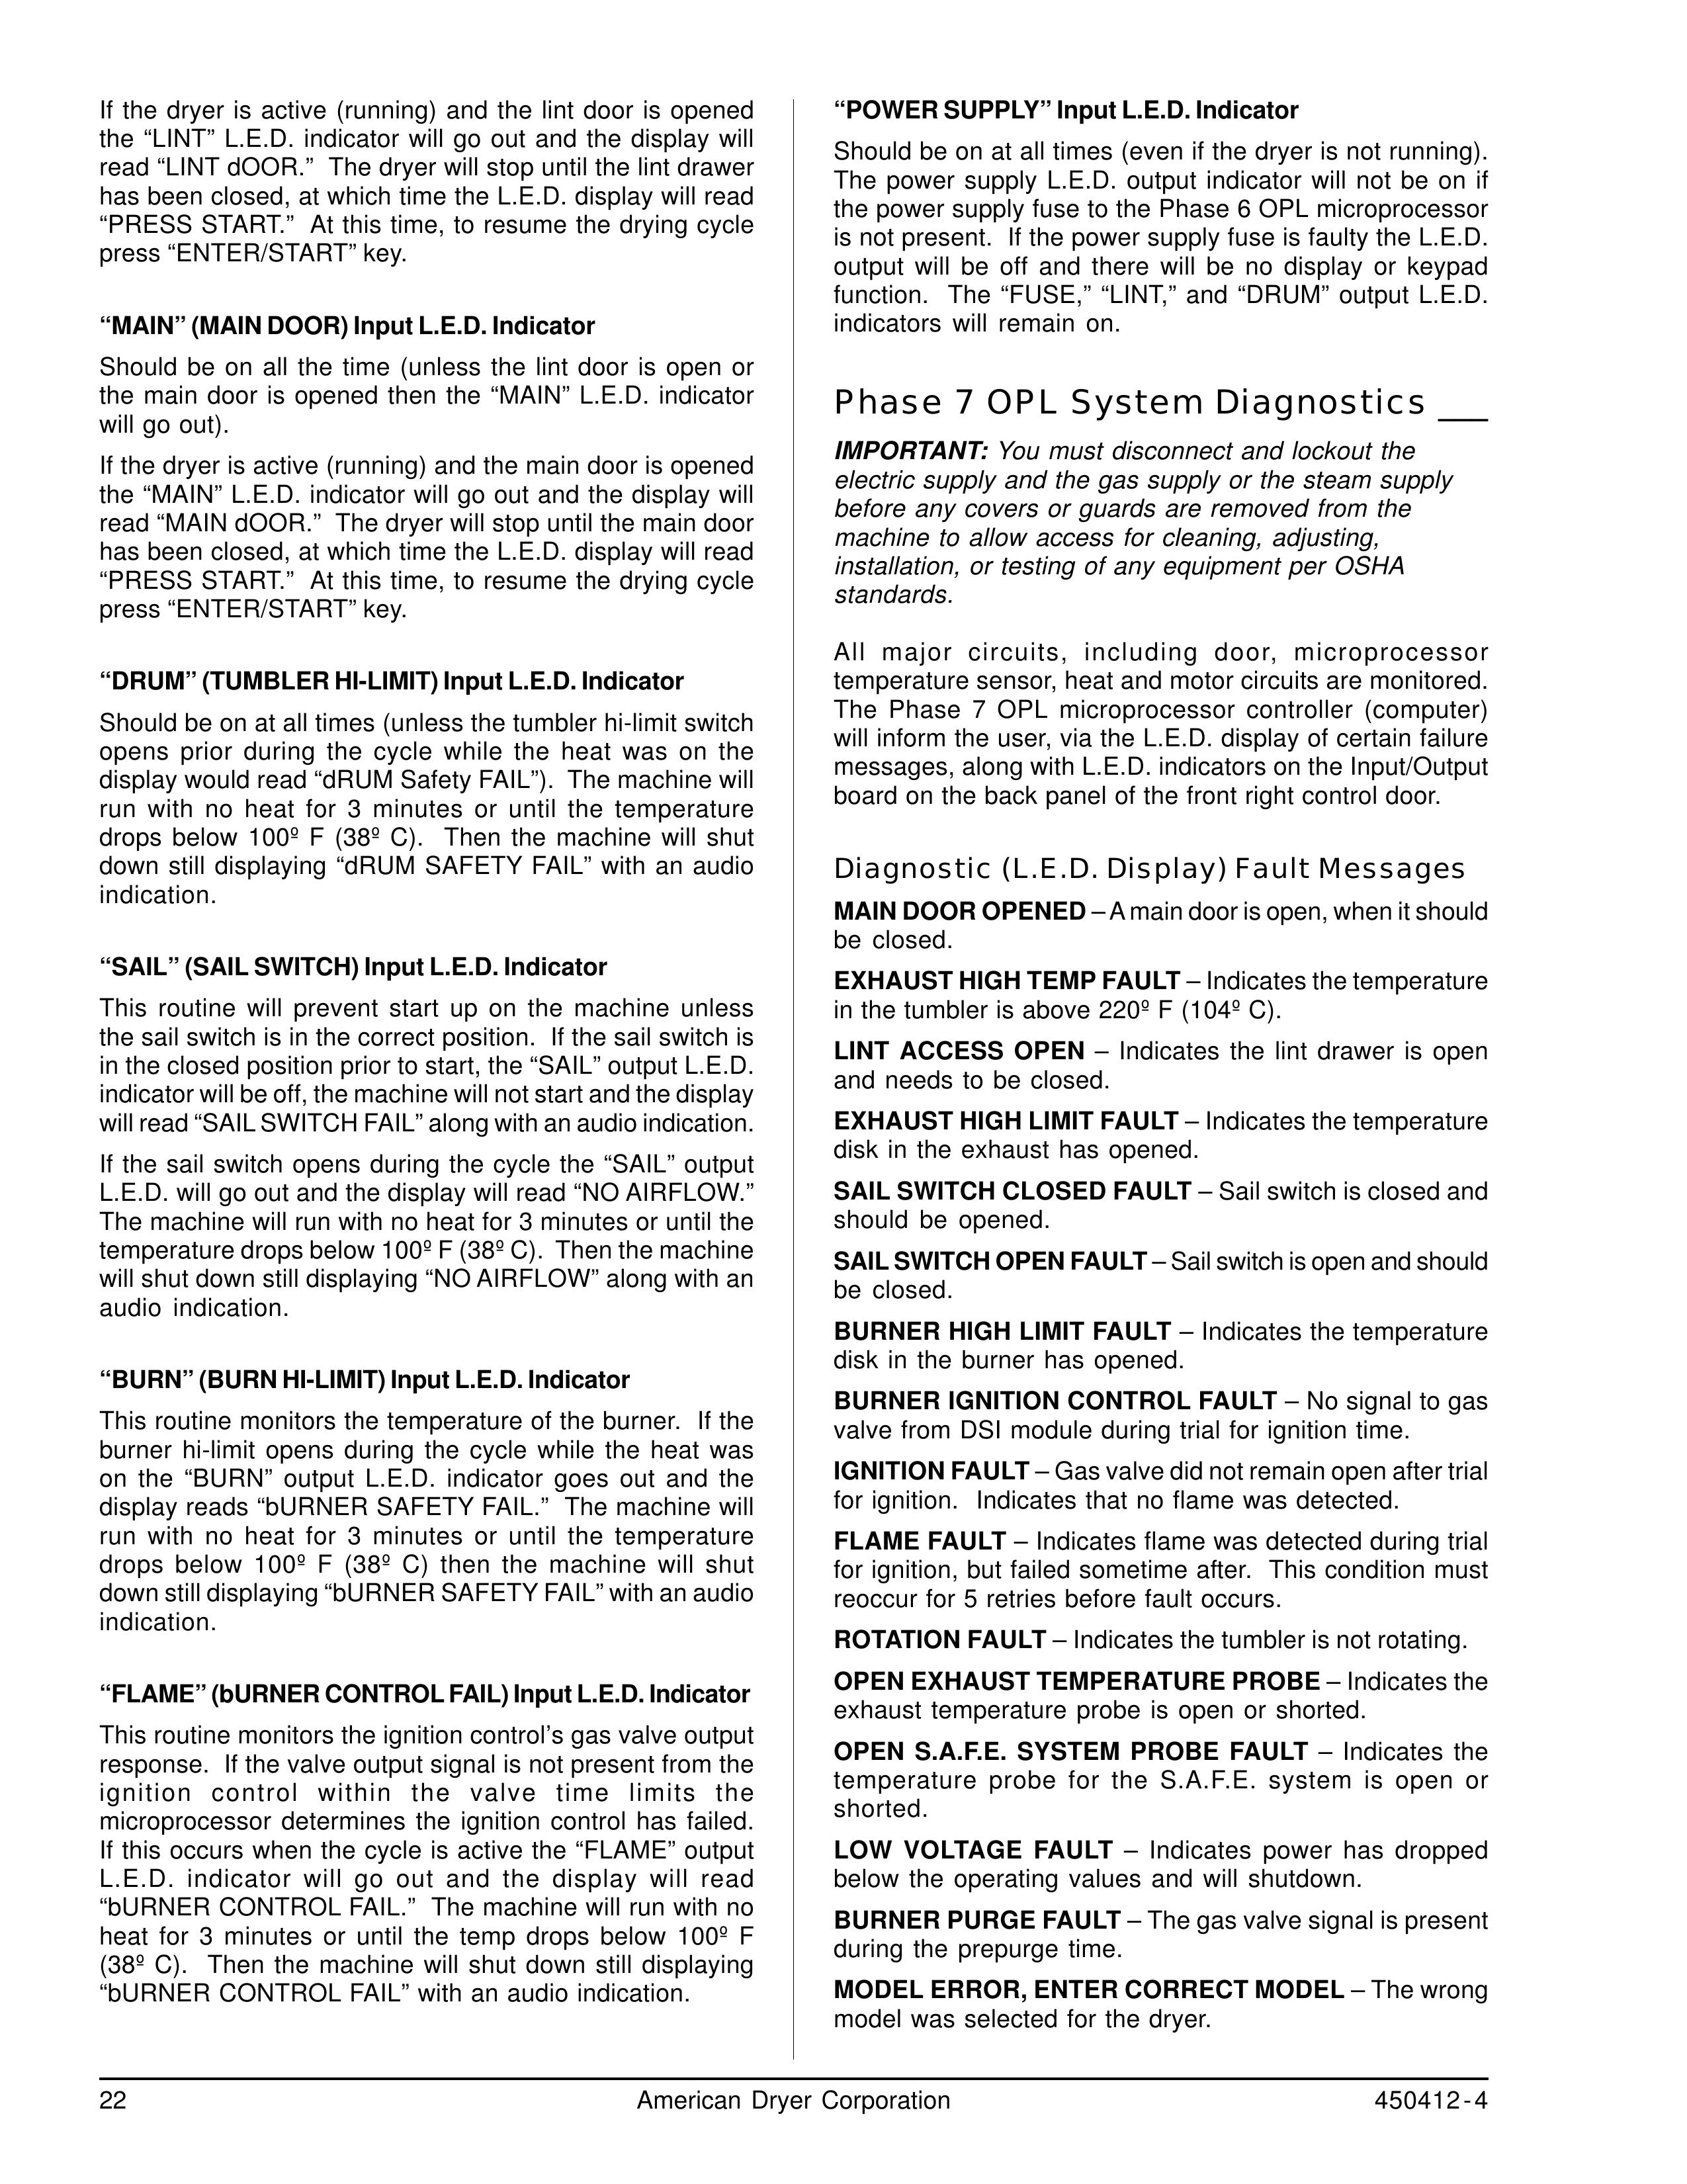 ADC ML-122 Clothes Dryer User Manual (Page 22)